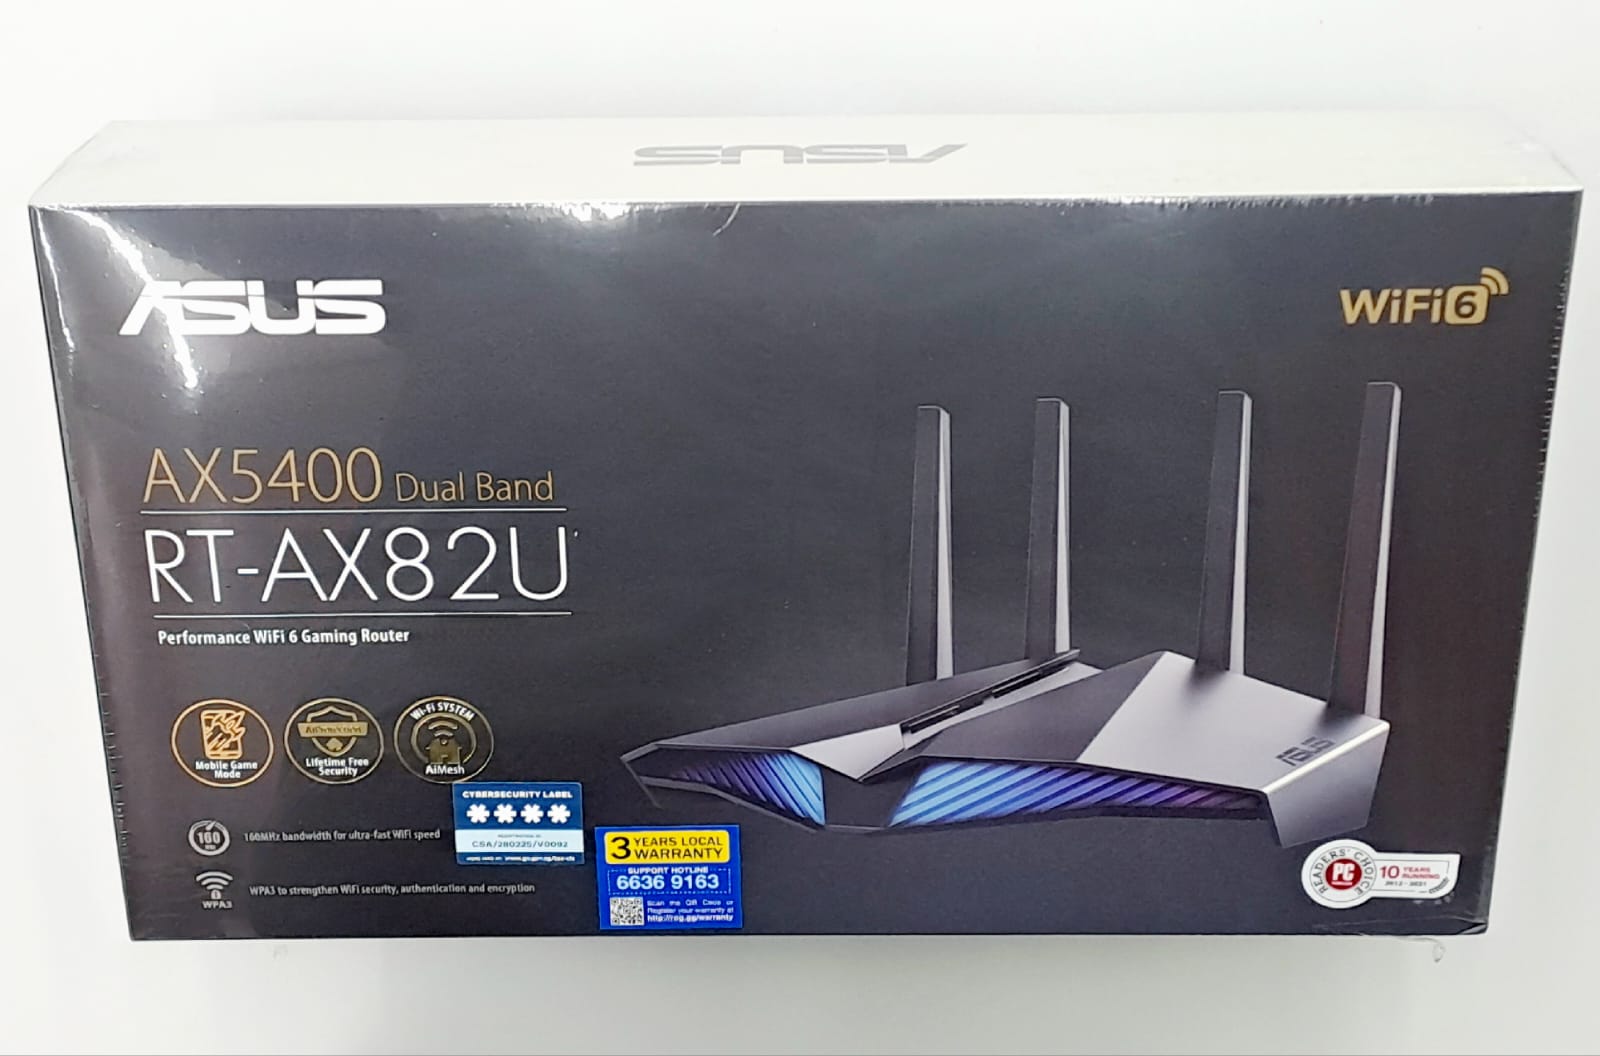 ASUS AX5400 Performance WiFi 6 Gaming Router